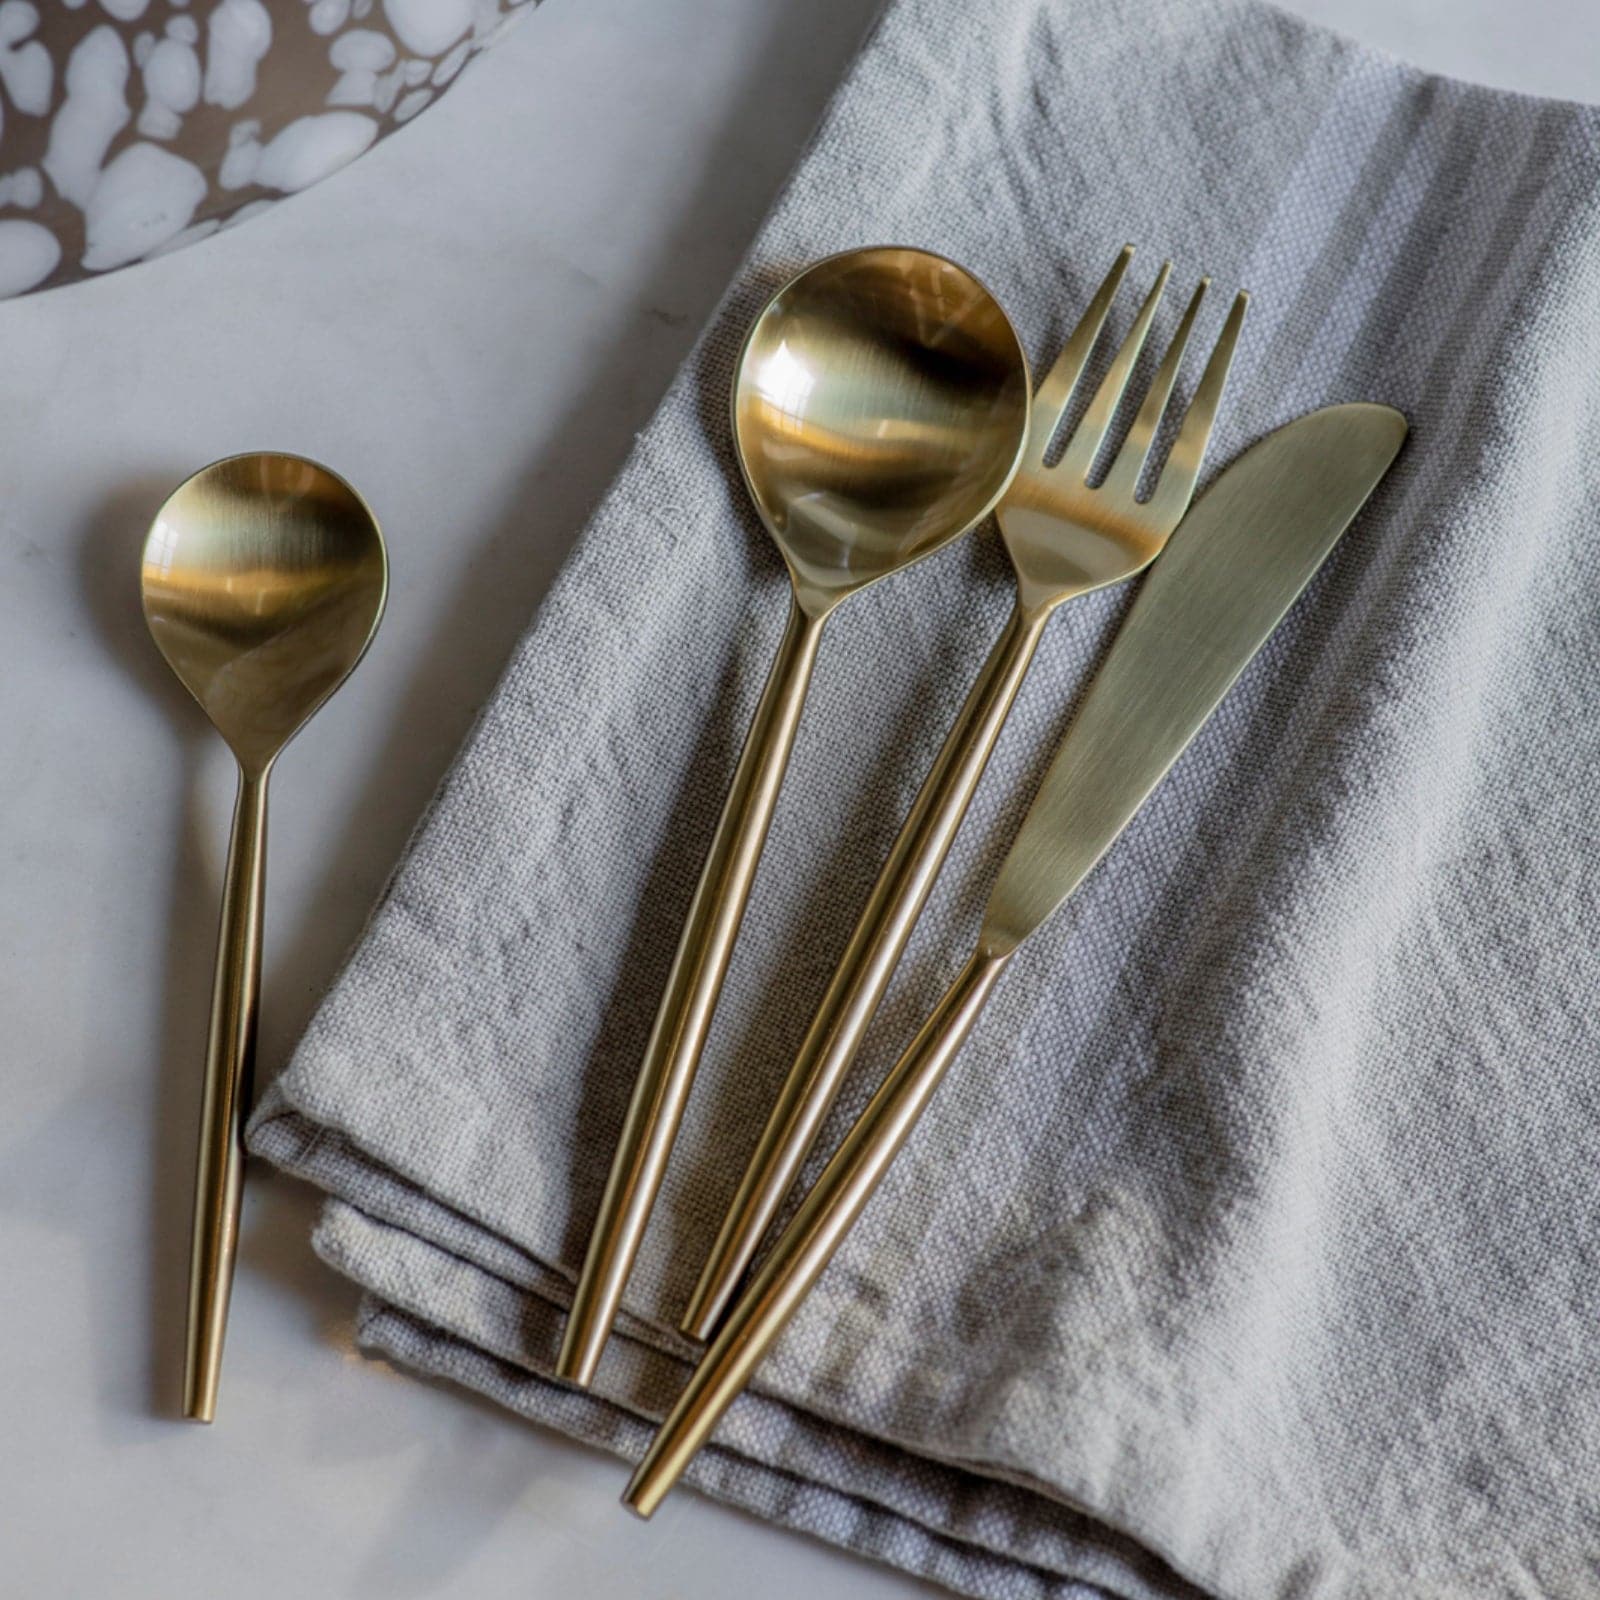 Gold Cutlery Set - 16 Piece - The Farthing